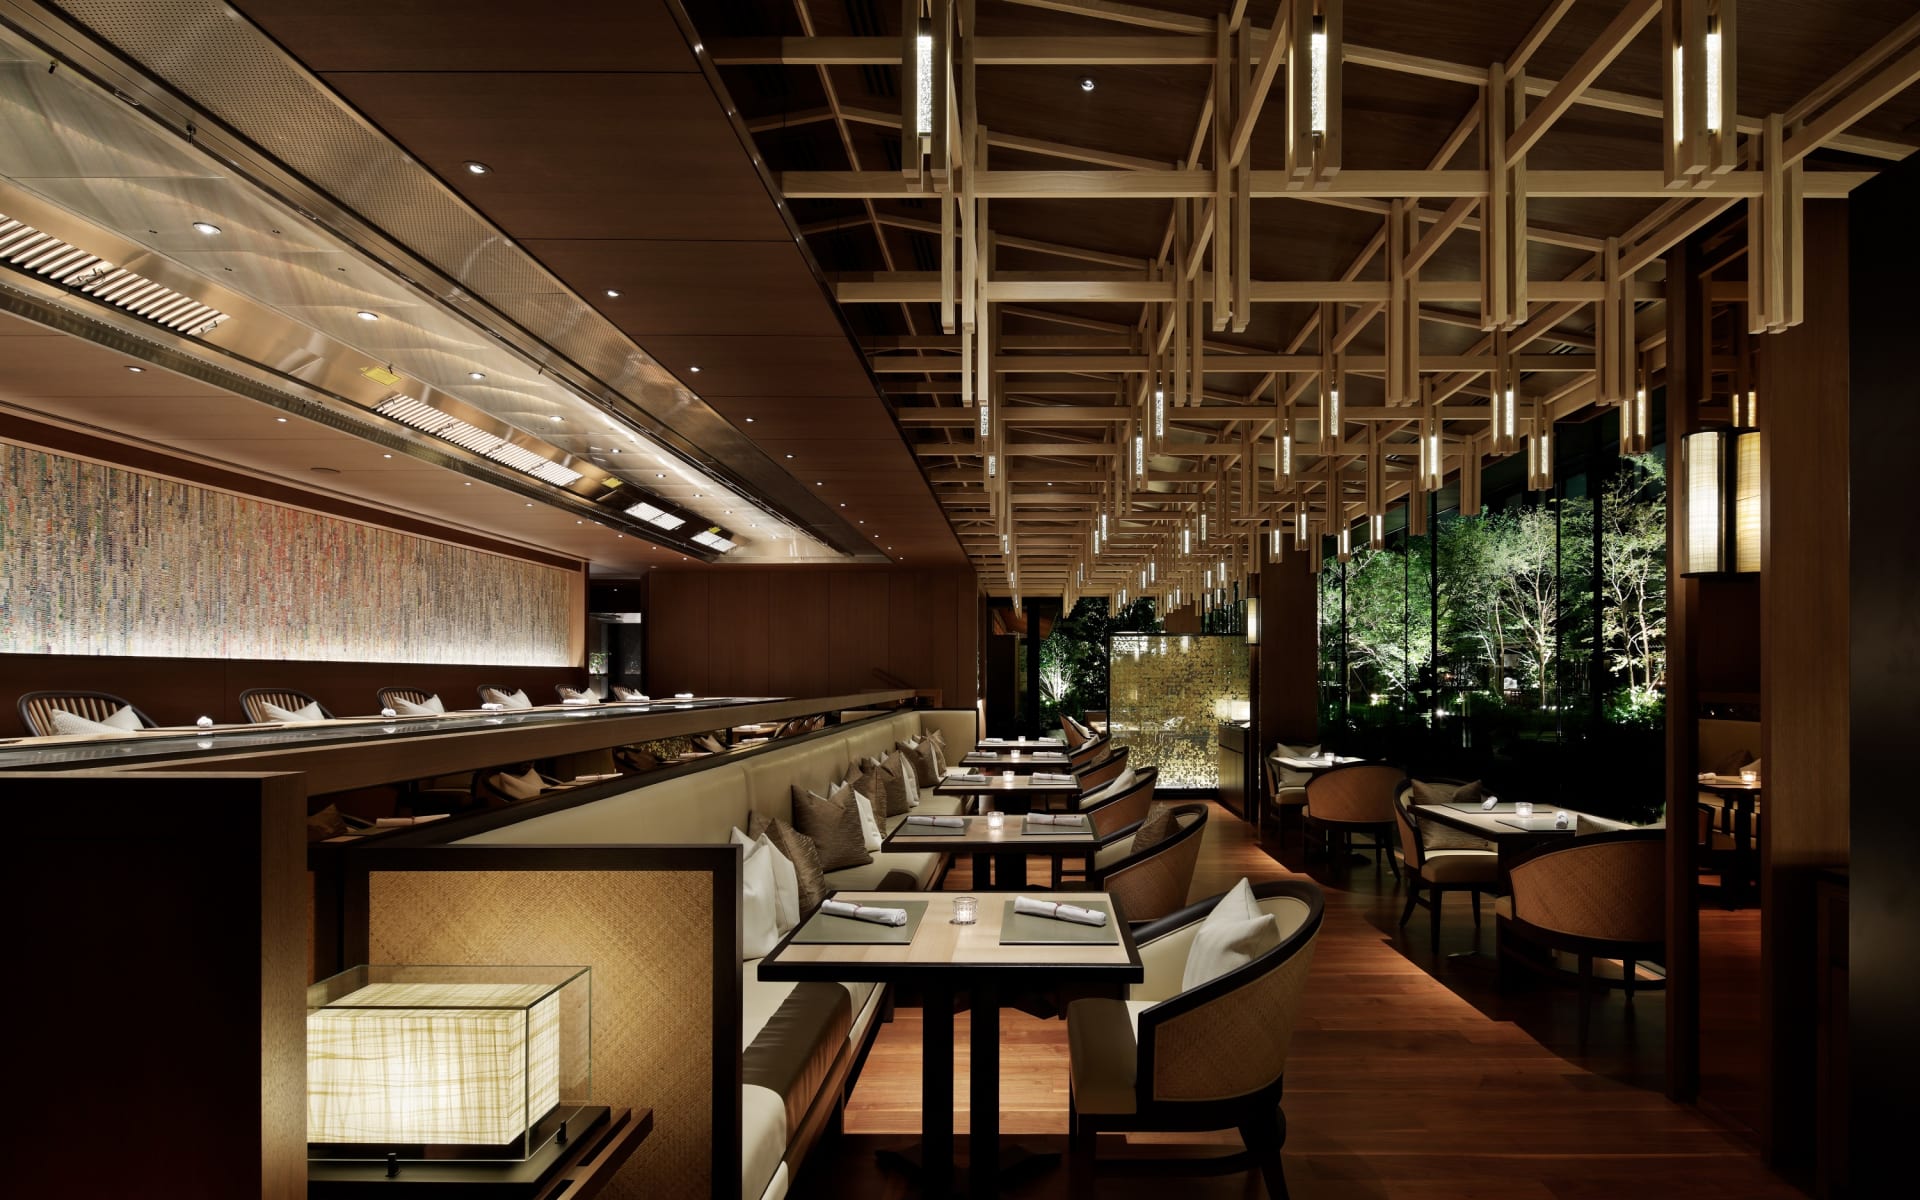 The Mitsui restaurant has a contemporary design, with tall ceilings, long rows of tables and lantern lights. 